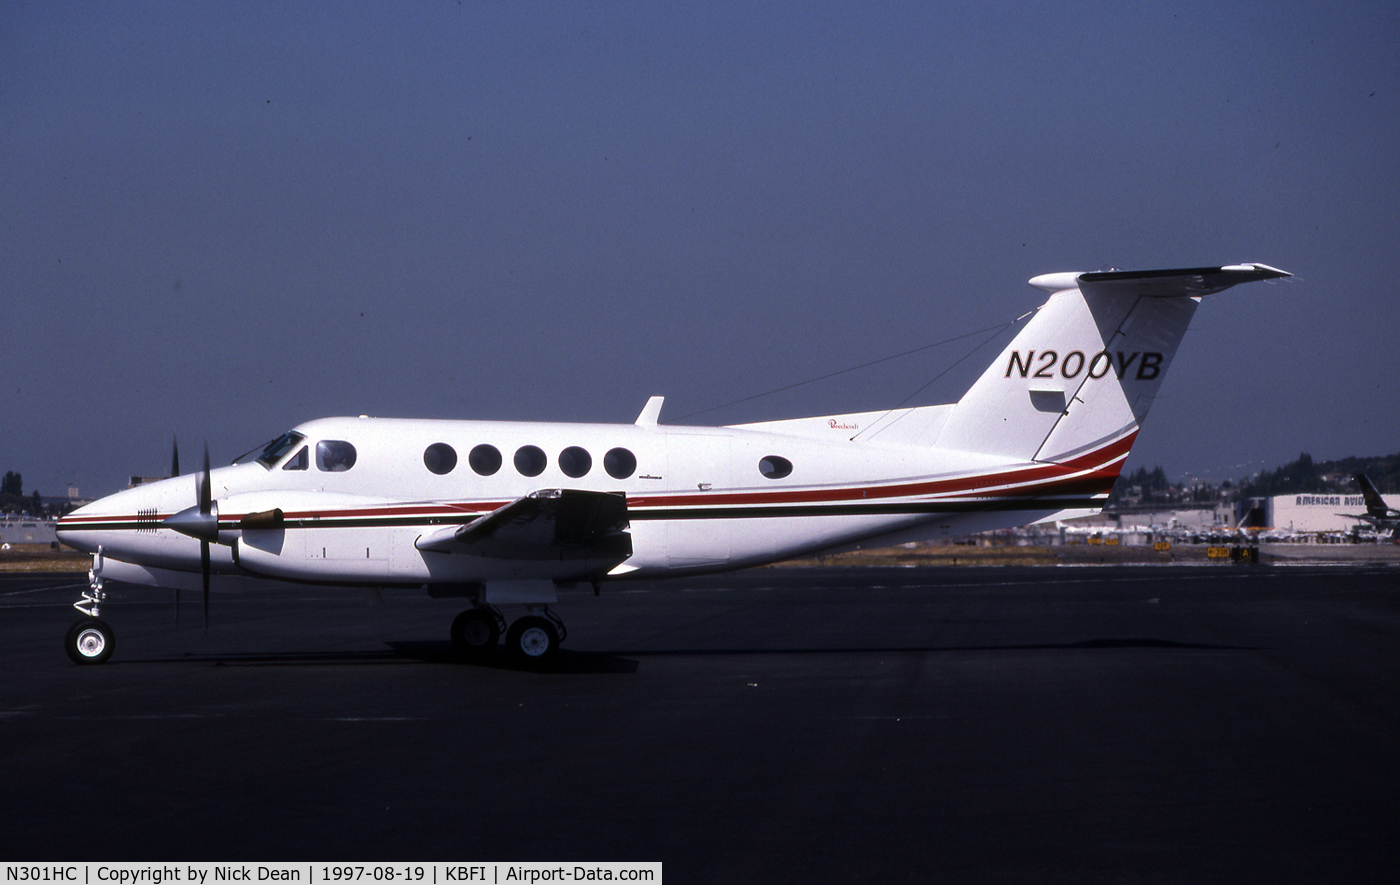 N301HC, 1985 Beech B200 King Air C/N BB-1219, KBFI (Seen as N200YB prior to becoming N301HC)